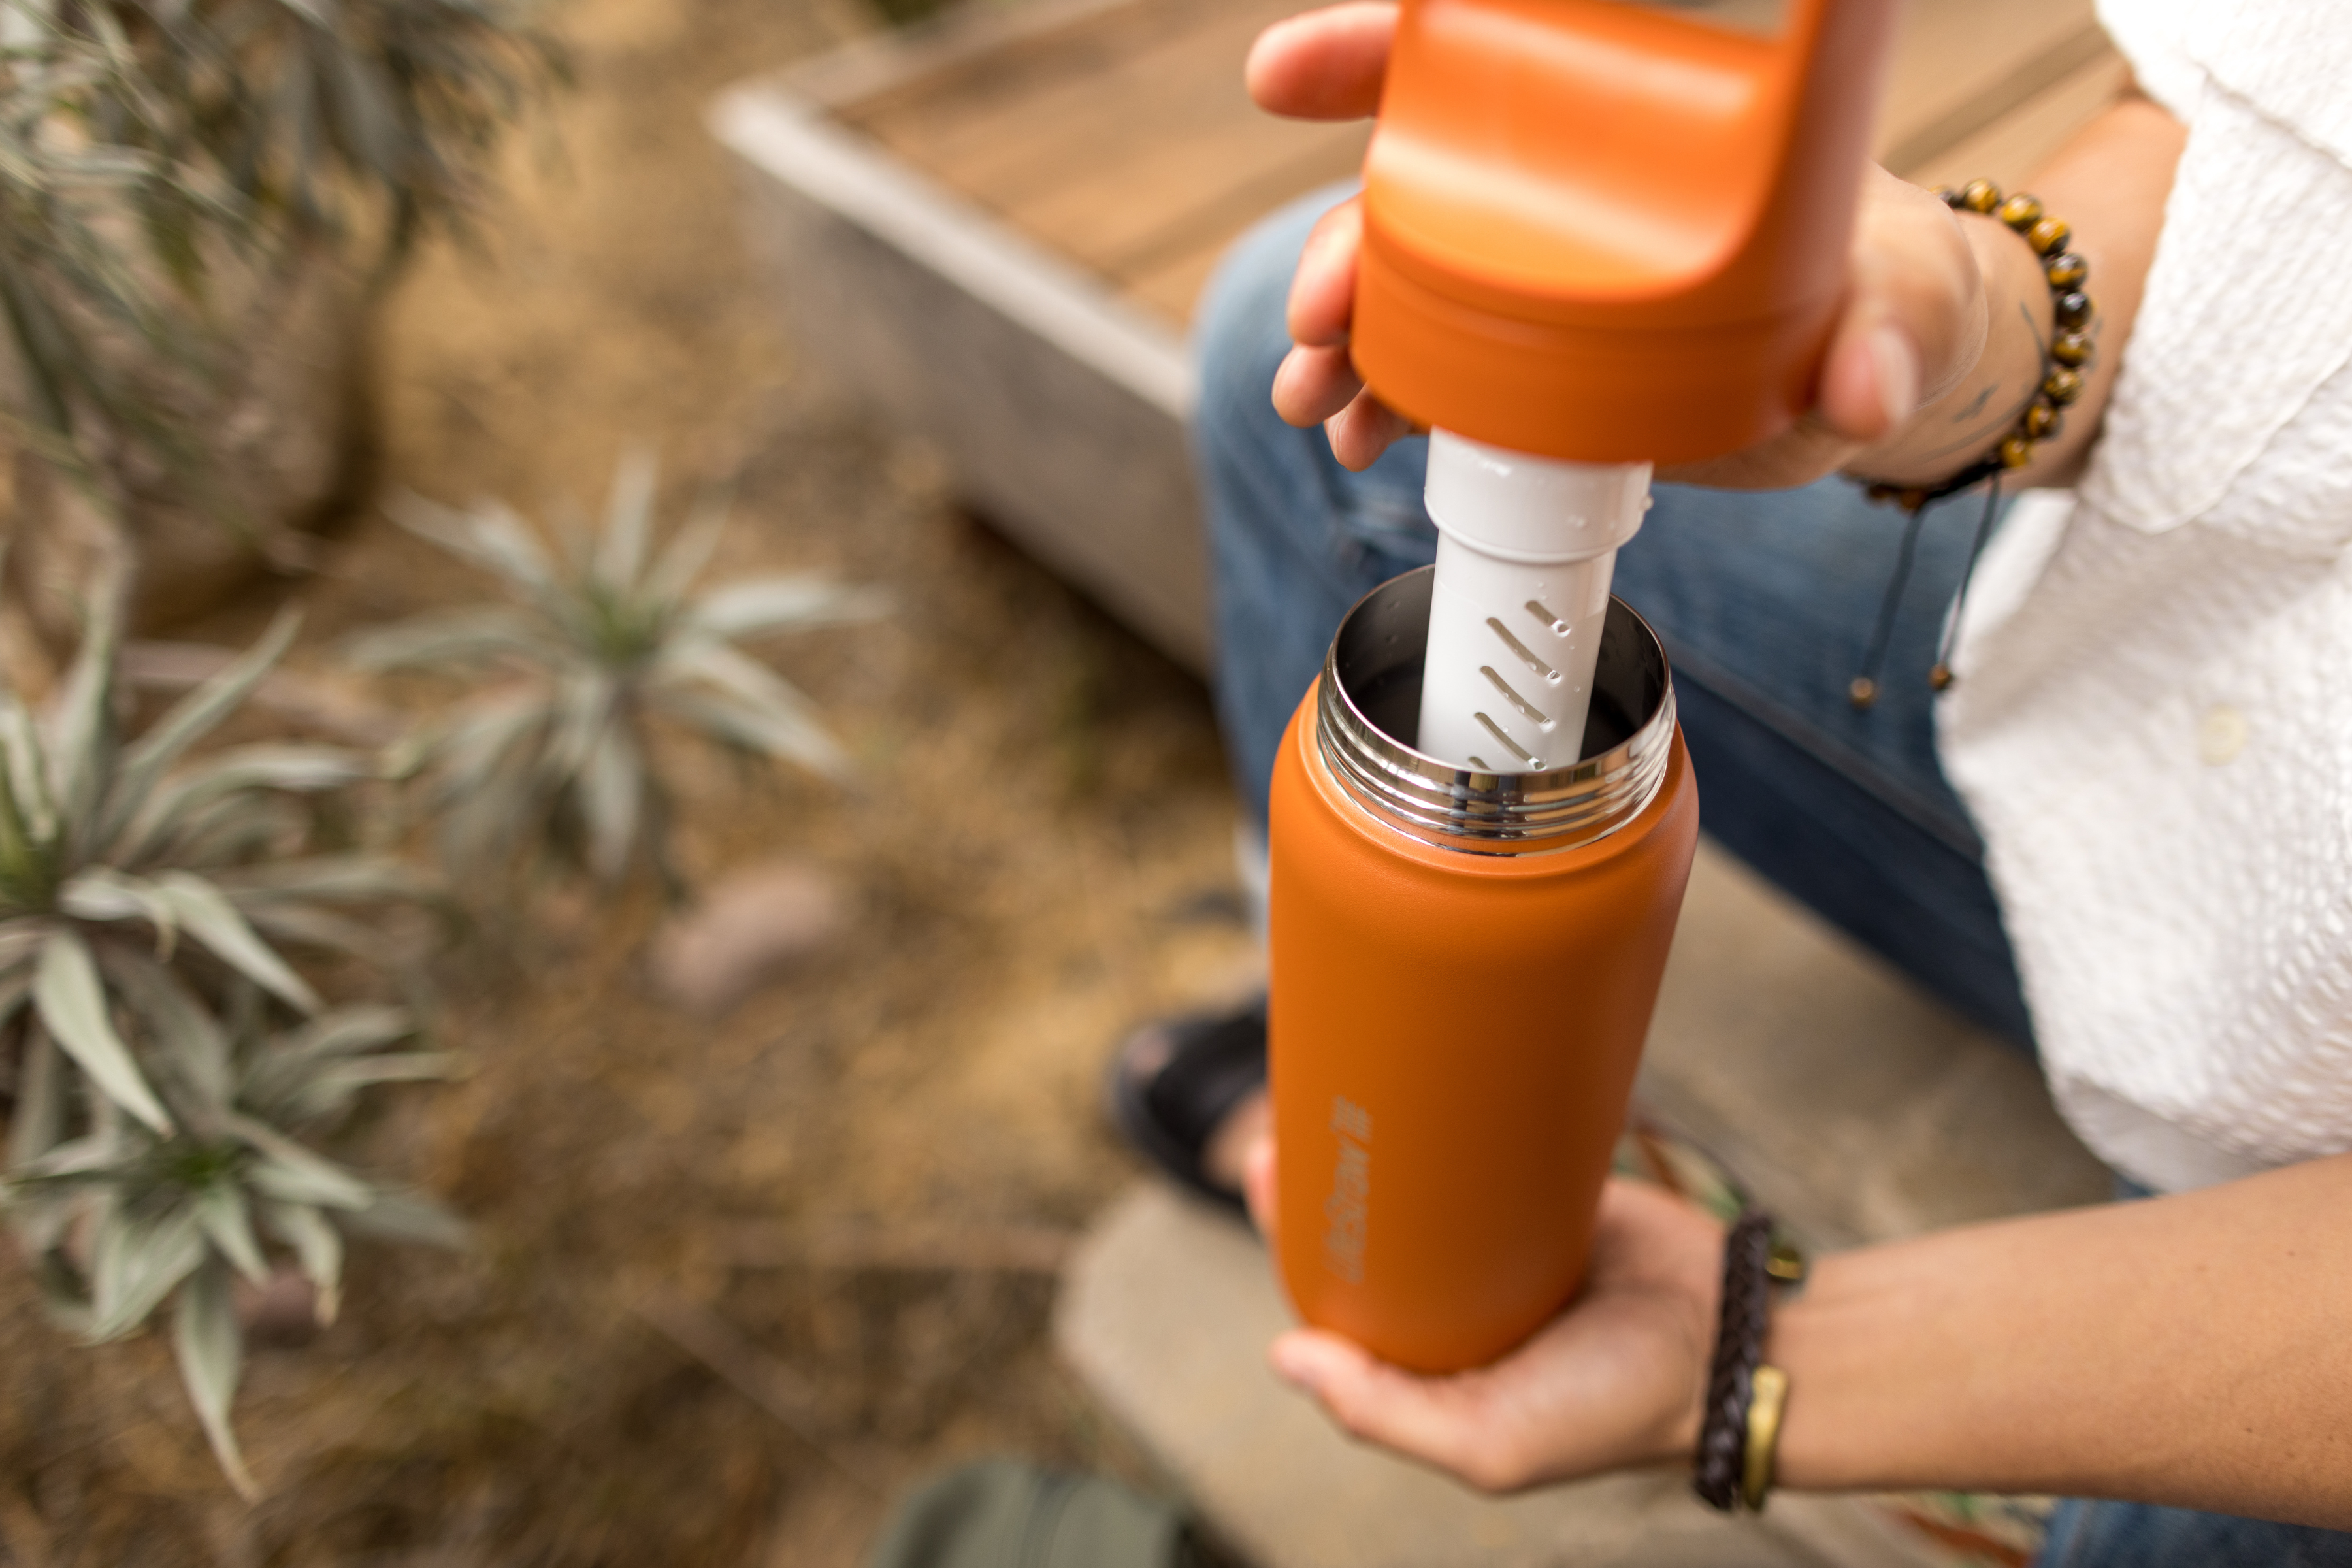 LifeStraw releases ‘Go Series’ water bottles with built-in filters